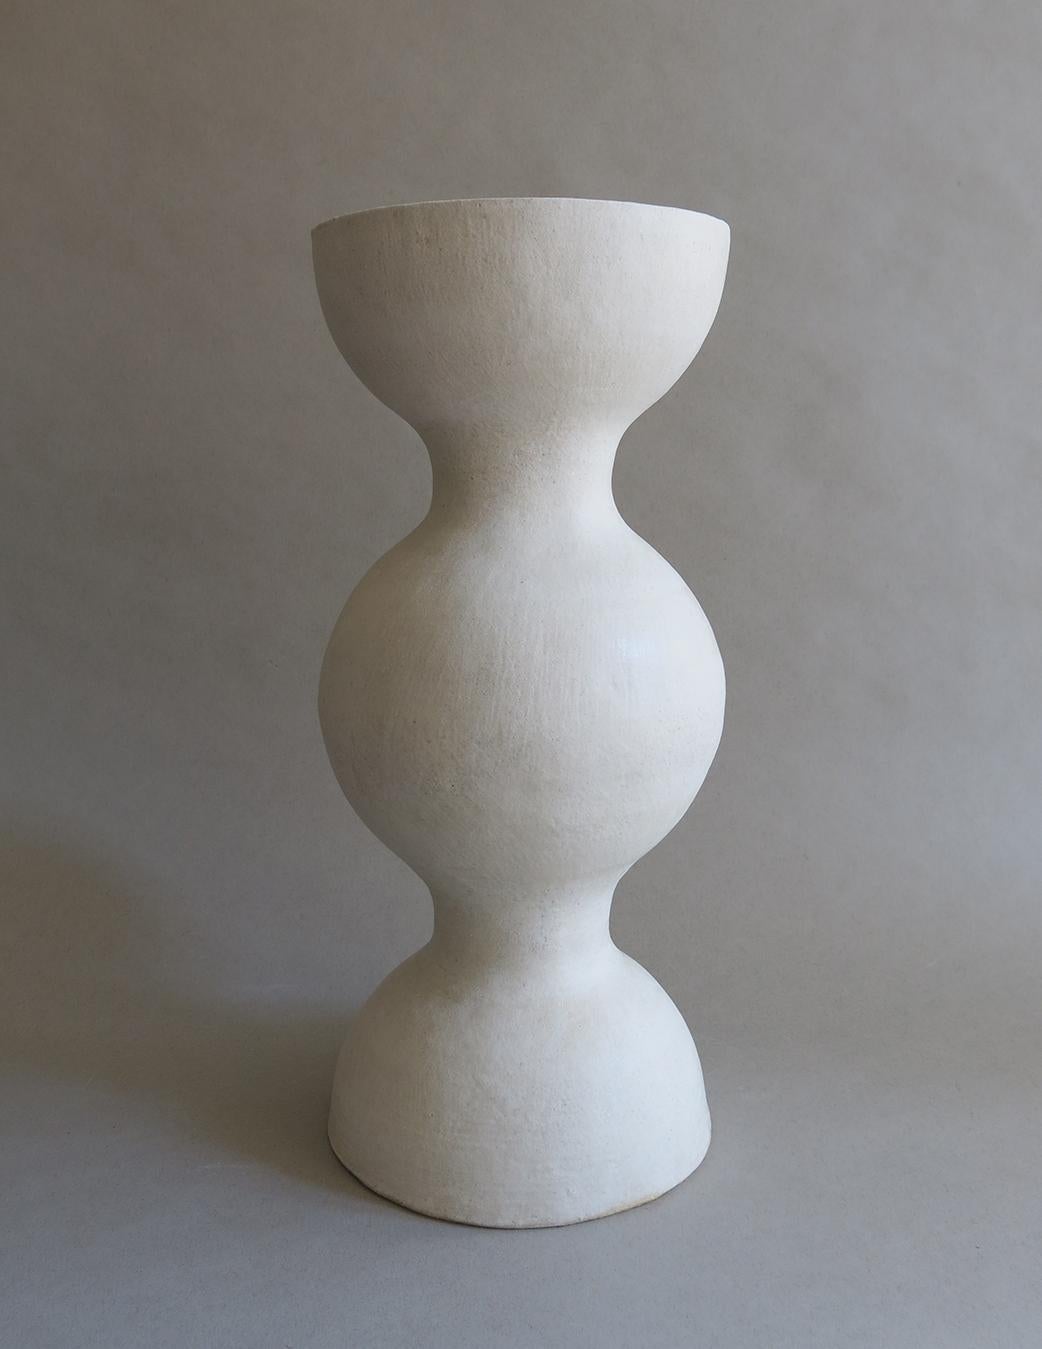 This exquisite sculptural ceramic stoneware BBL-7 Vessel by Humble Matter is hand-built out of an off-white textured stoneware with a smooth semi-matte glaze, which reflects a subtle hue that changes with the light. The piece measures 14.5